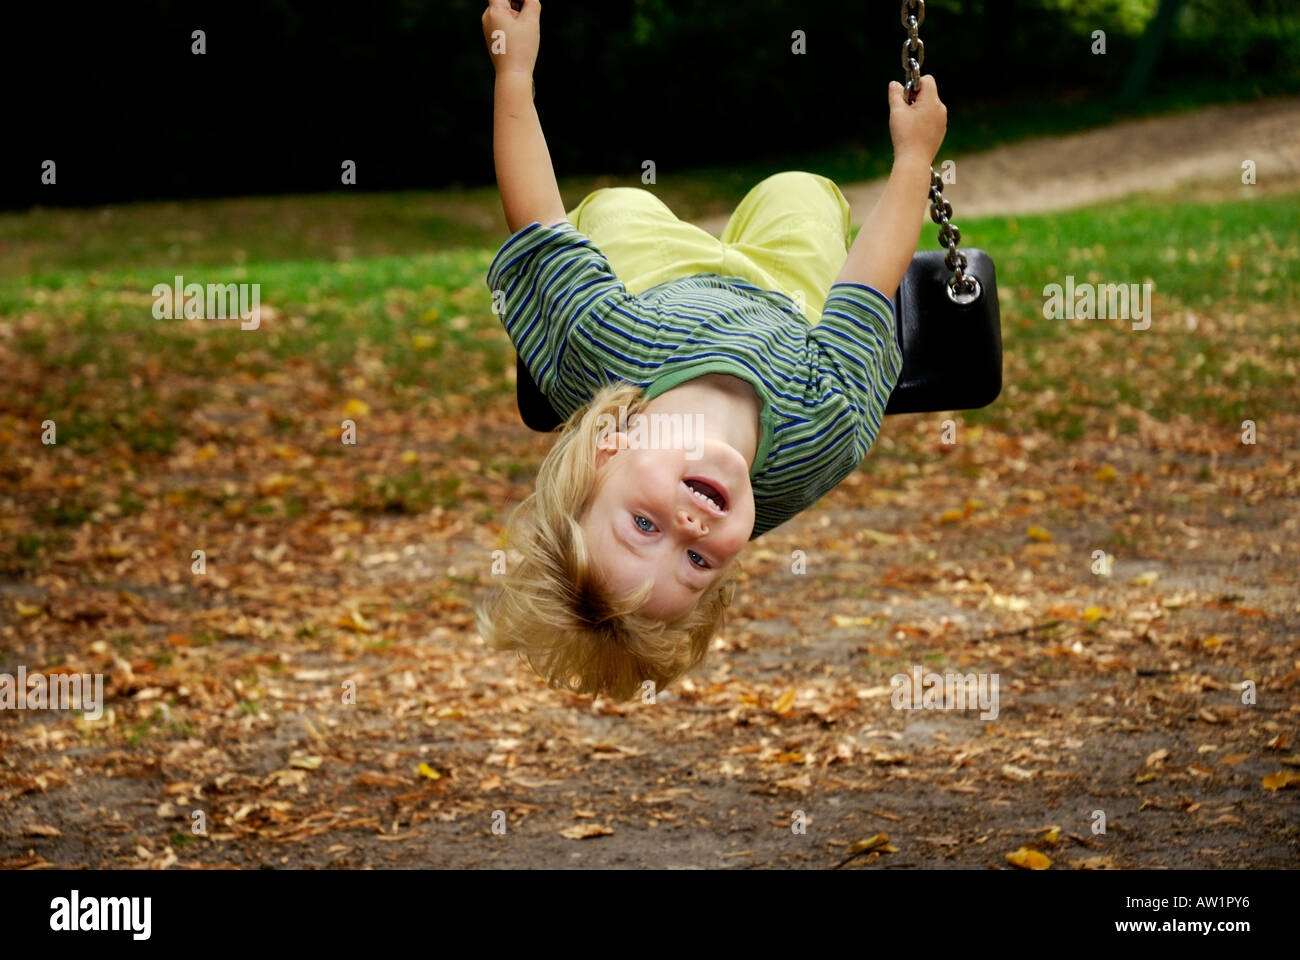 Little girl swinging upside down in a playground Stock Photo